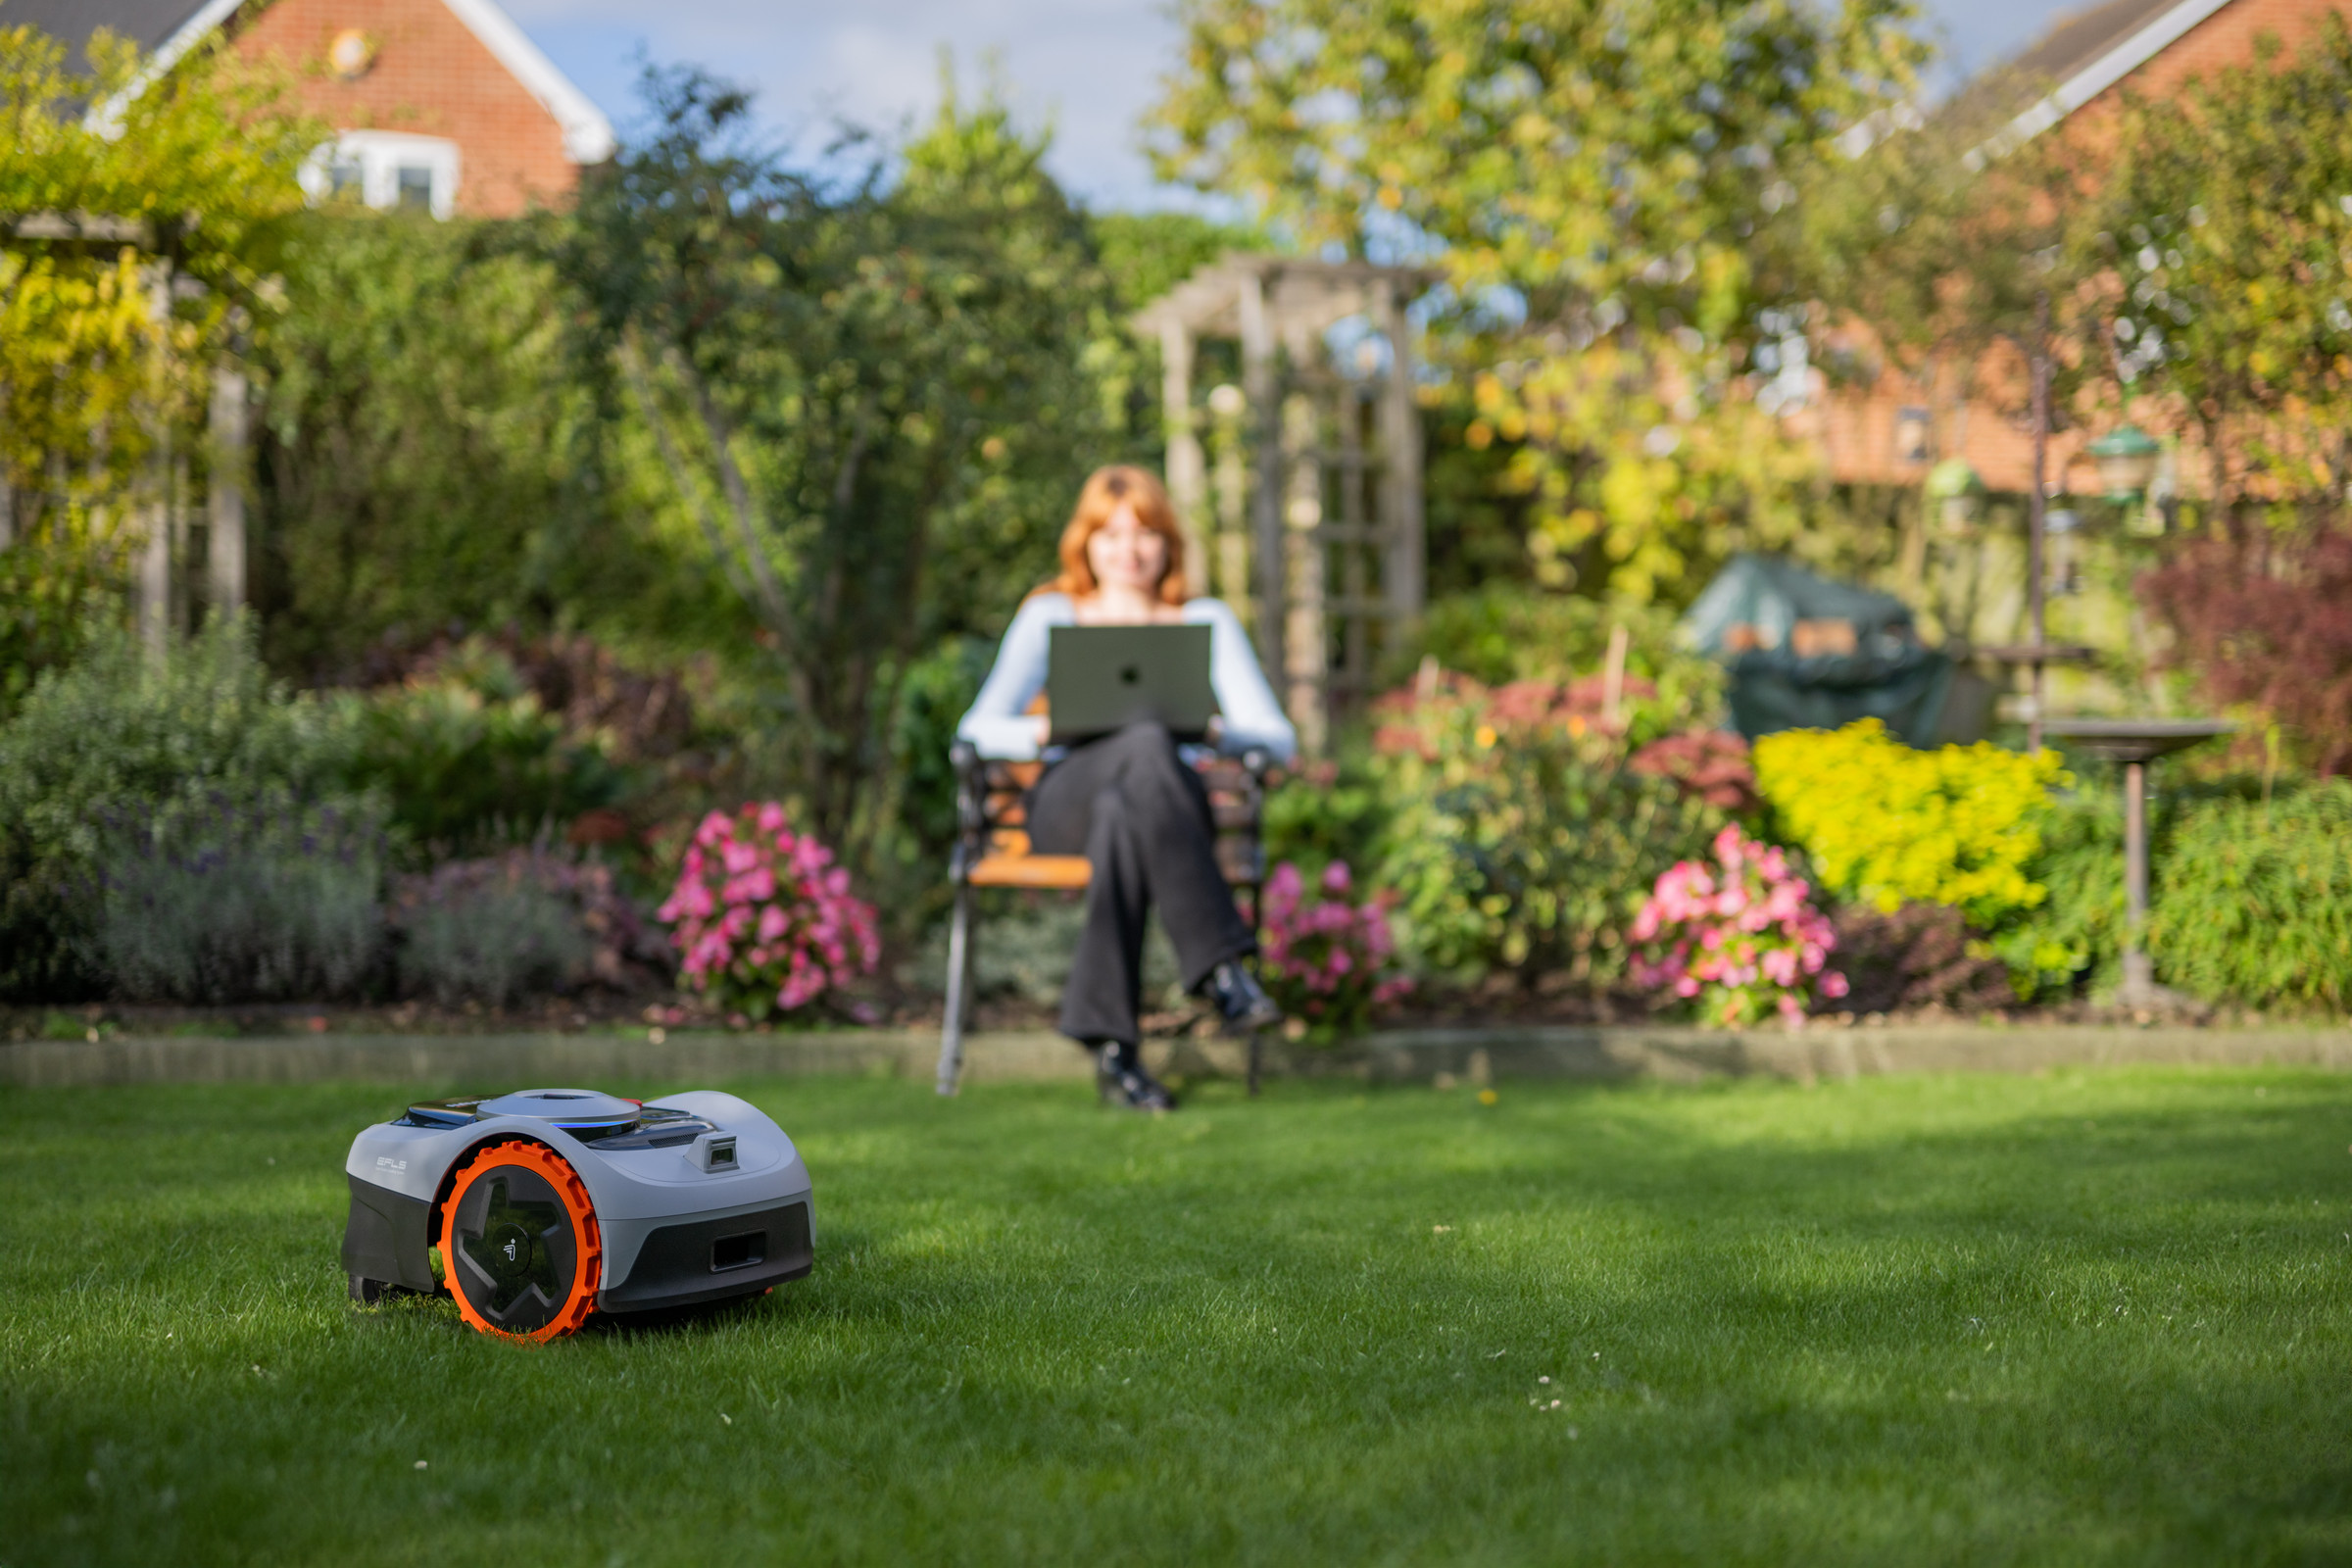 A robot lawnmower on a lawn with a lady sitting in a chair on her computer.